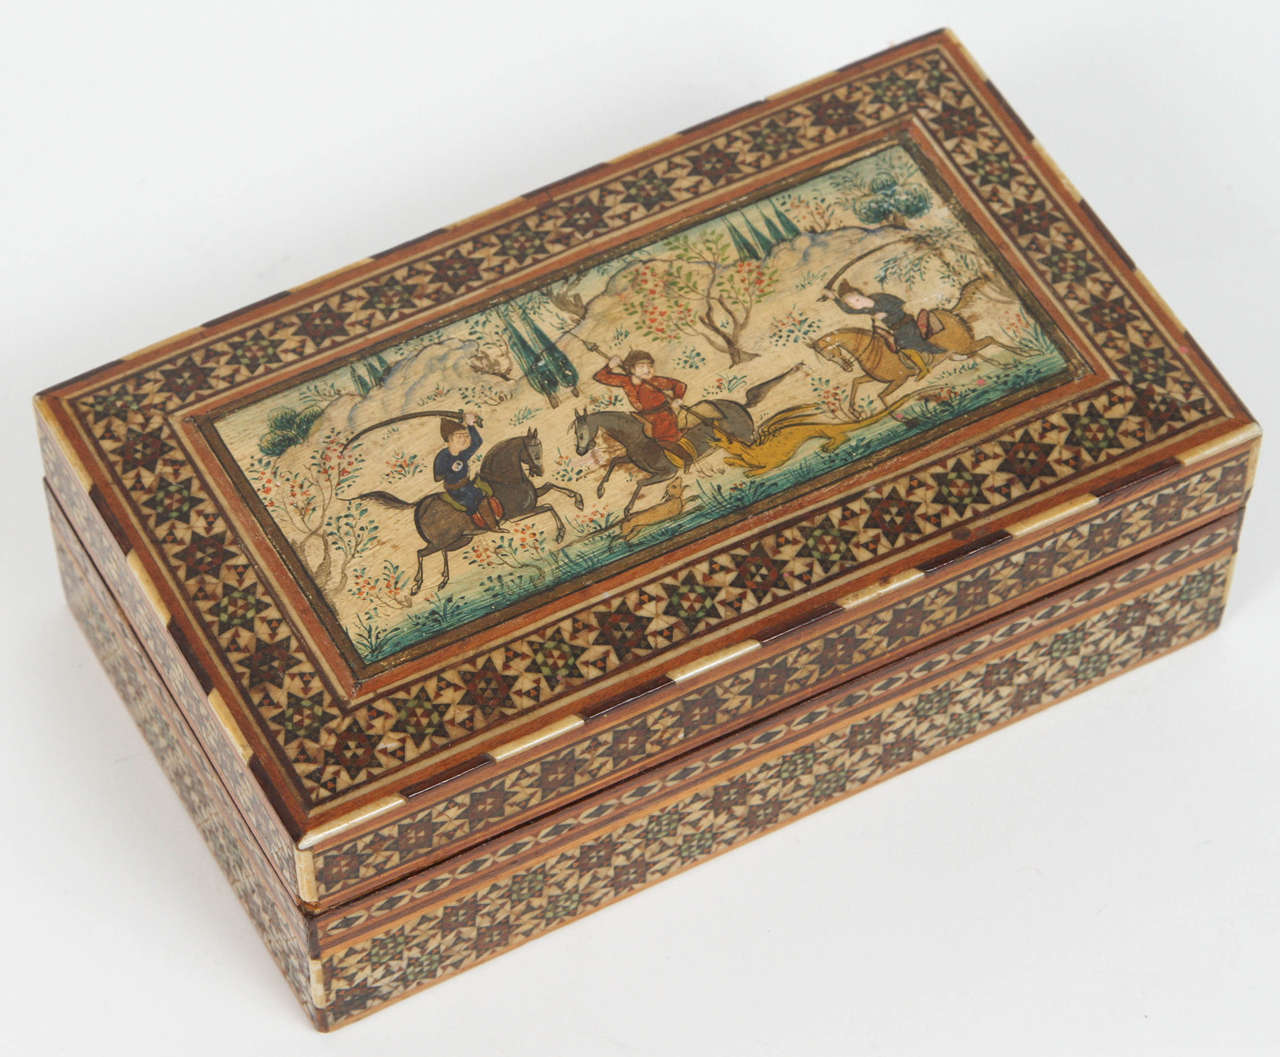 Fine Antique handcrafted box micro mosaic inlaid in geometric design and with a scene of 3 Iranian men on horses hunting.
This Middle Eastern Persian inlay boxes were used to store cigarettes, or cards.
Museum quality piece like the ones in Doris